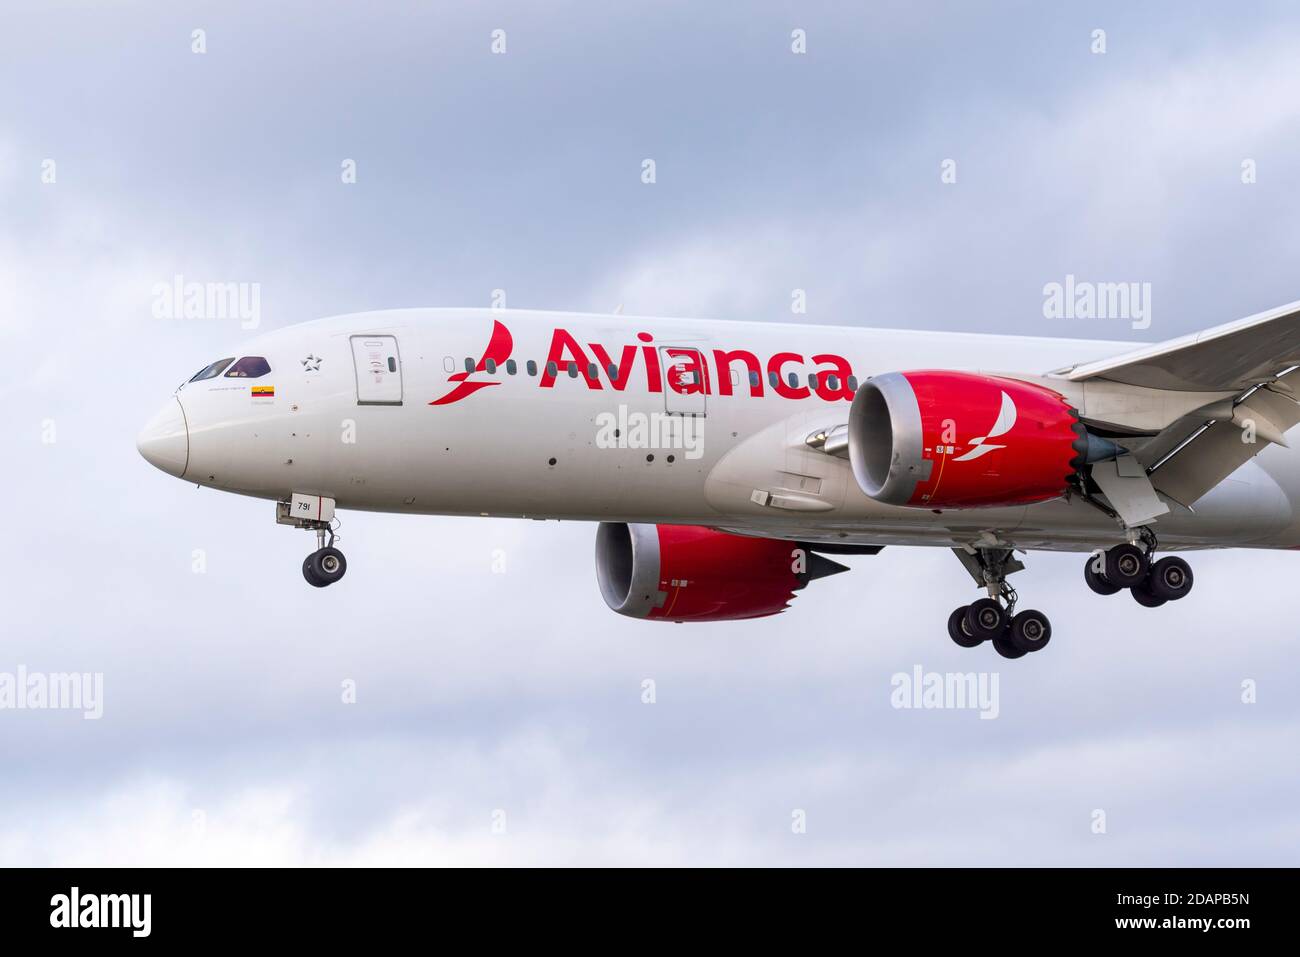 Avianca Boeing 787 jet airliner plane N791AV on approach to land at London Heathrow Airport, UK, during COVID 19 lockdown. Colombian airline Stock Photo